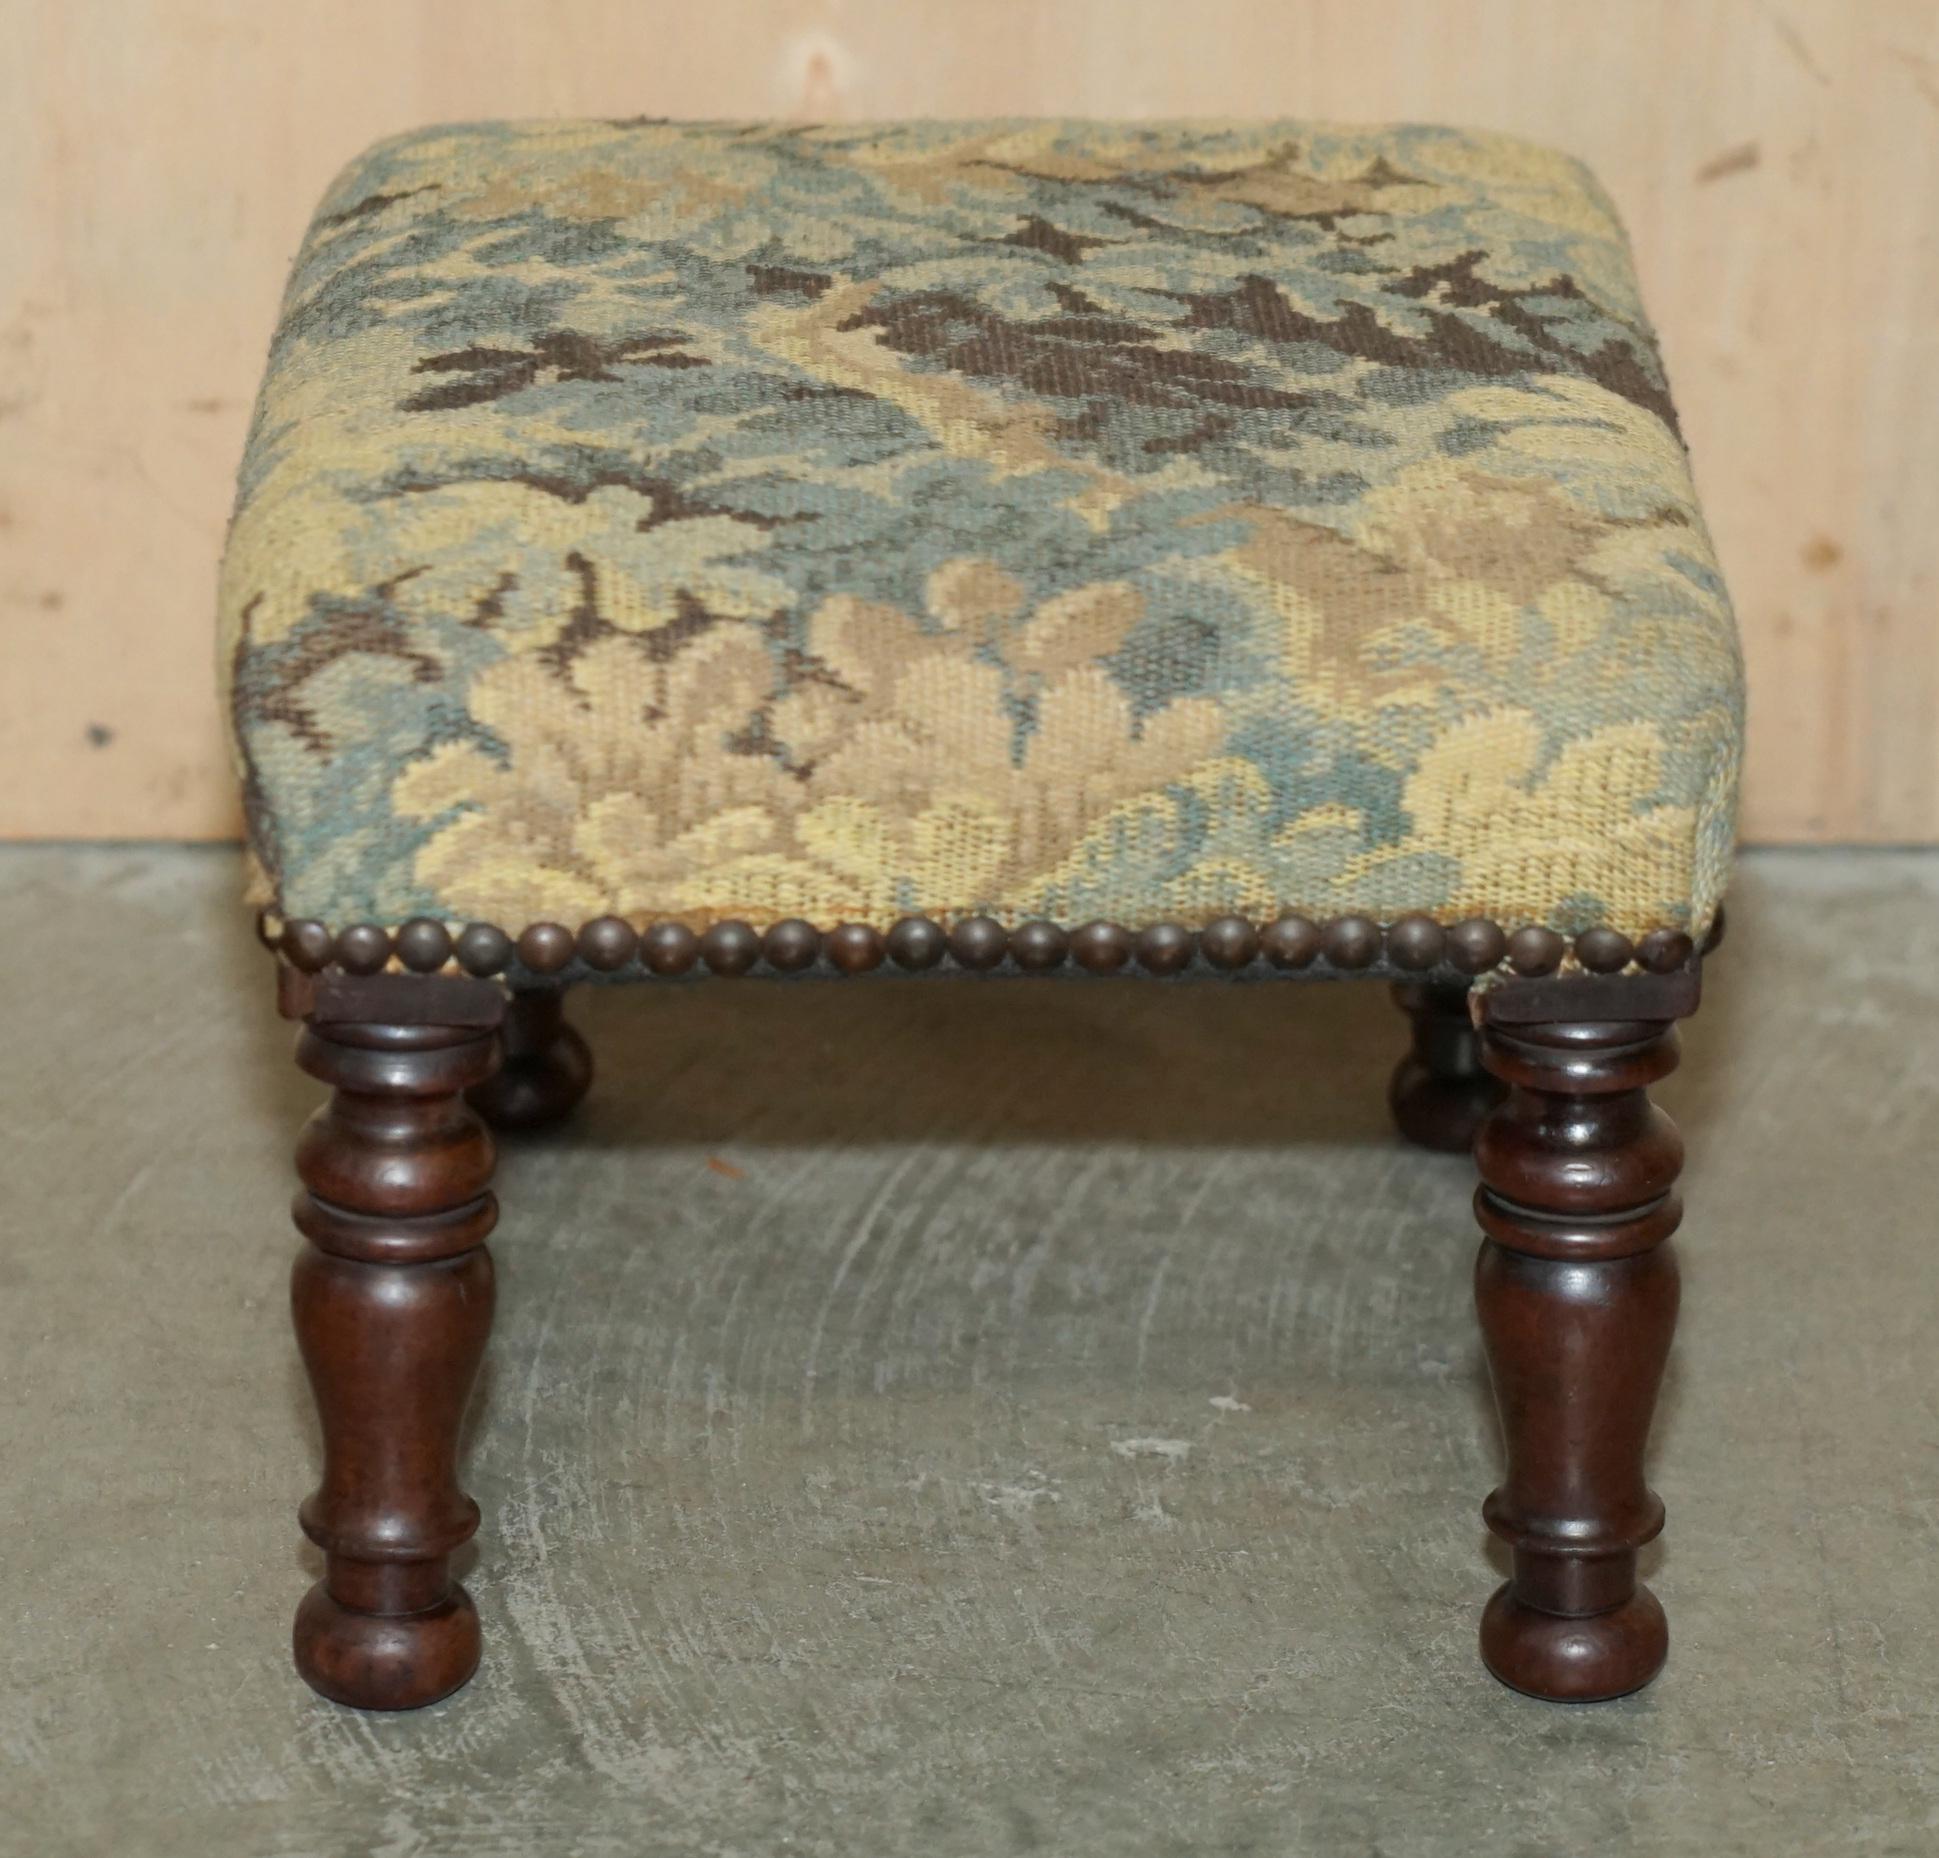 SMALL ANTIQUE GEORGIAN  Style ENGLiSH COUNTRY HOUSE FOOTSTOOL VERZIERTES KLEID im Angebot 13